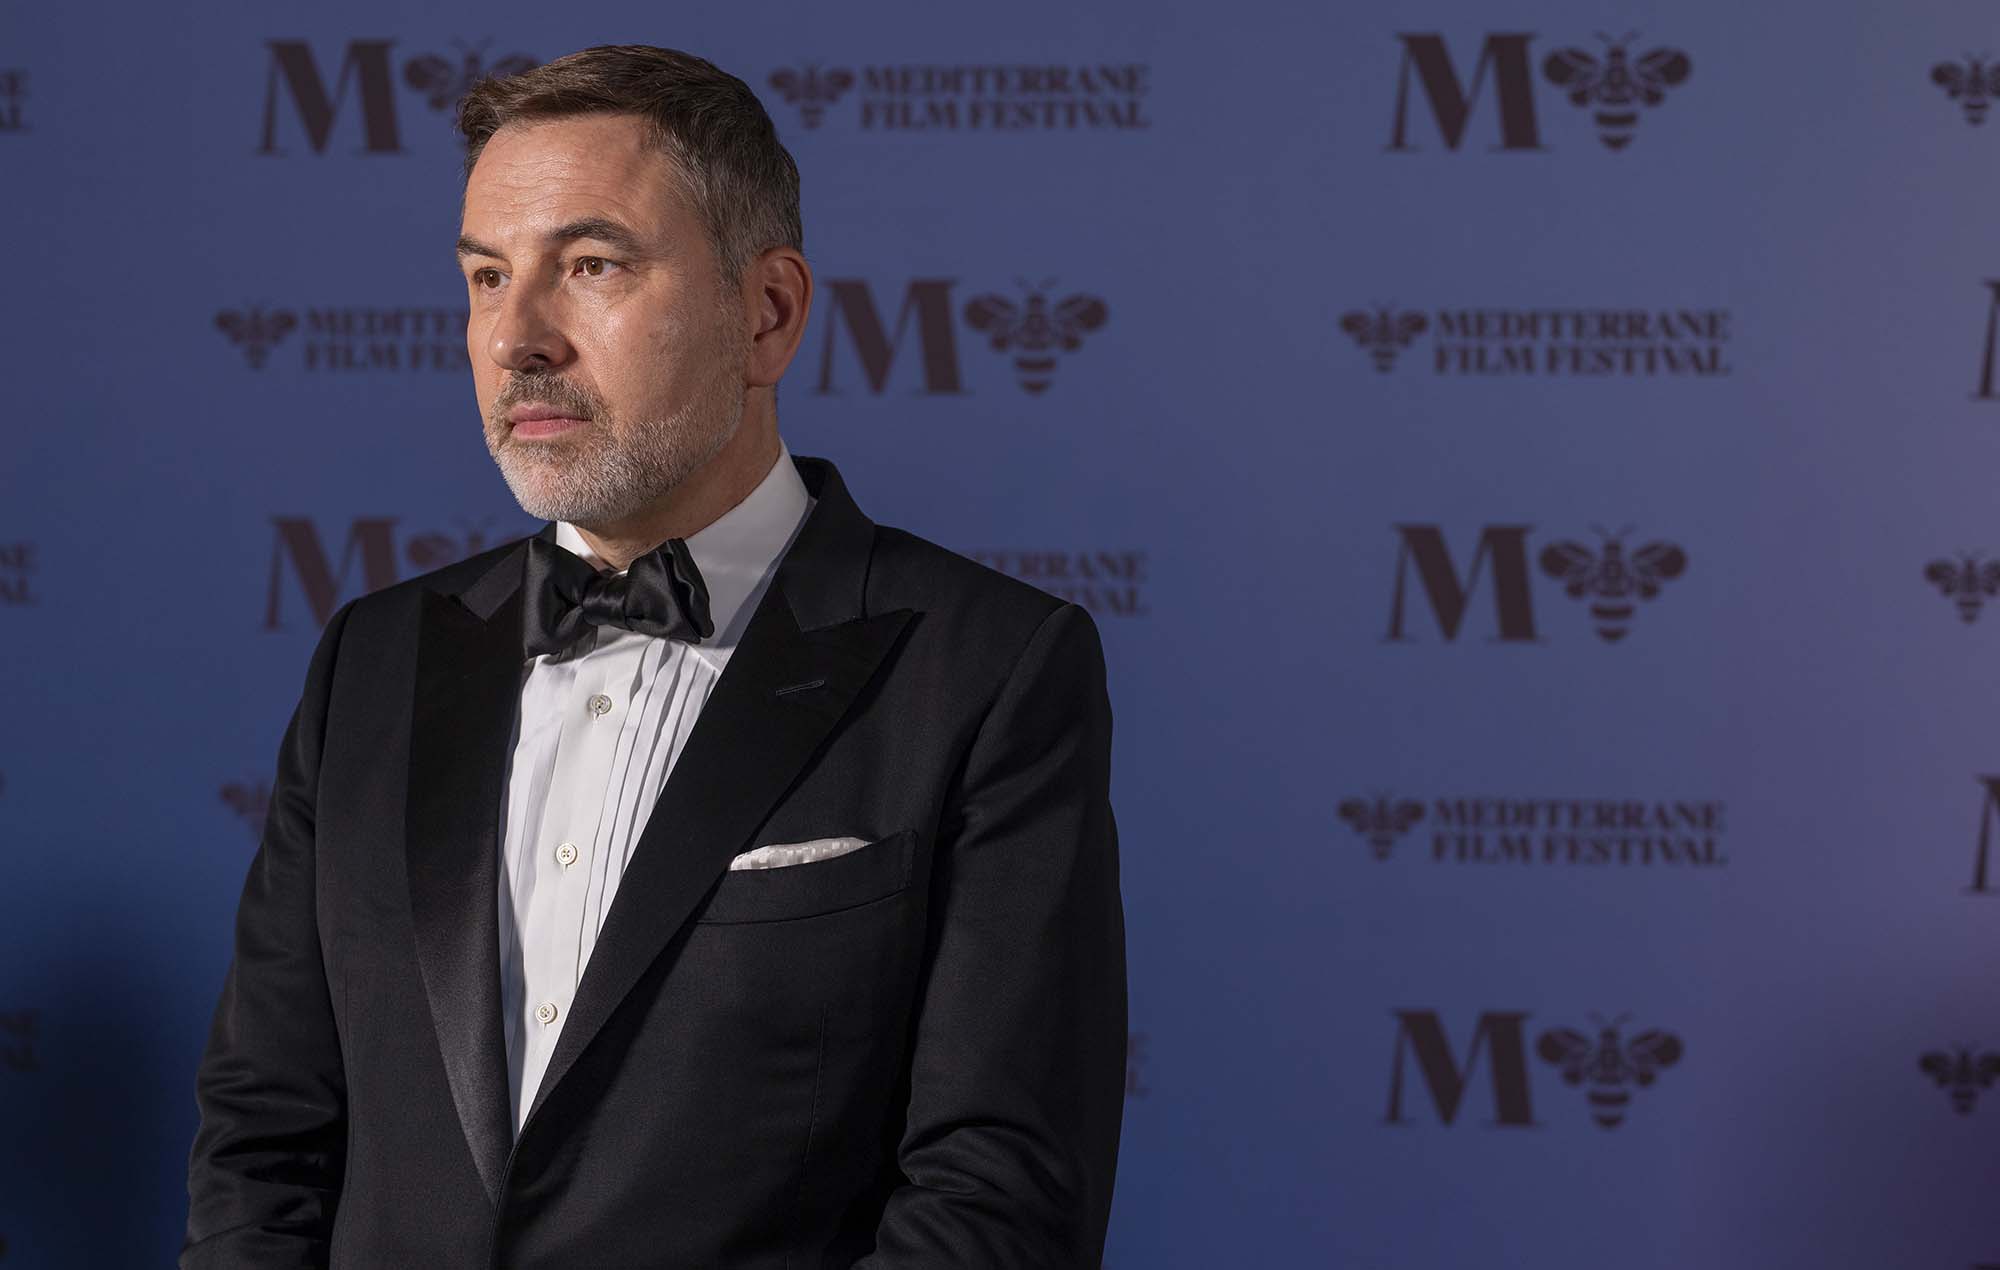 David Walliams had ‘suicidal thoughts’ after ‘BGT’ recordings leaked